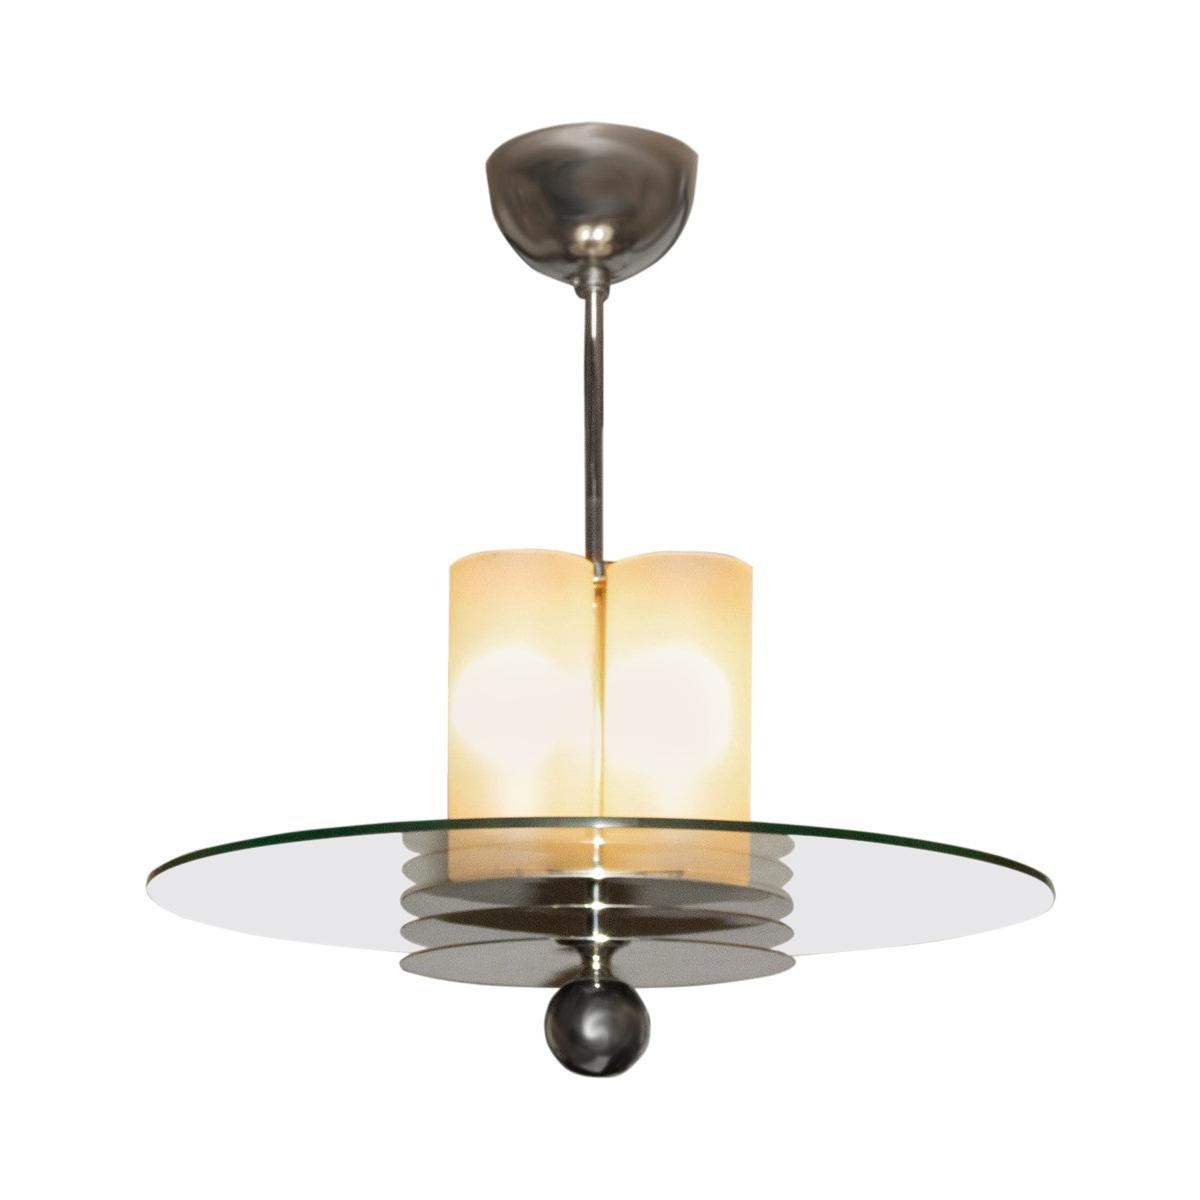 French Art Deco Bunished Nickel and Glass Pendant Light Fixture